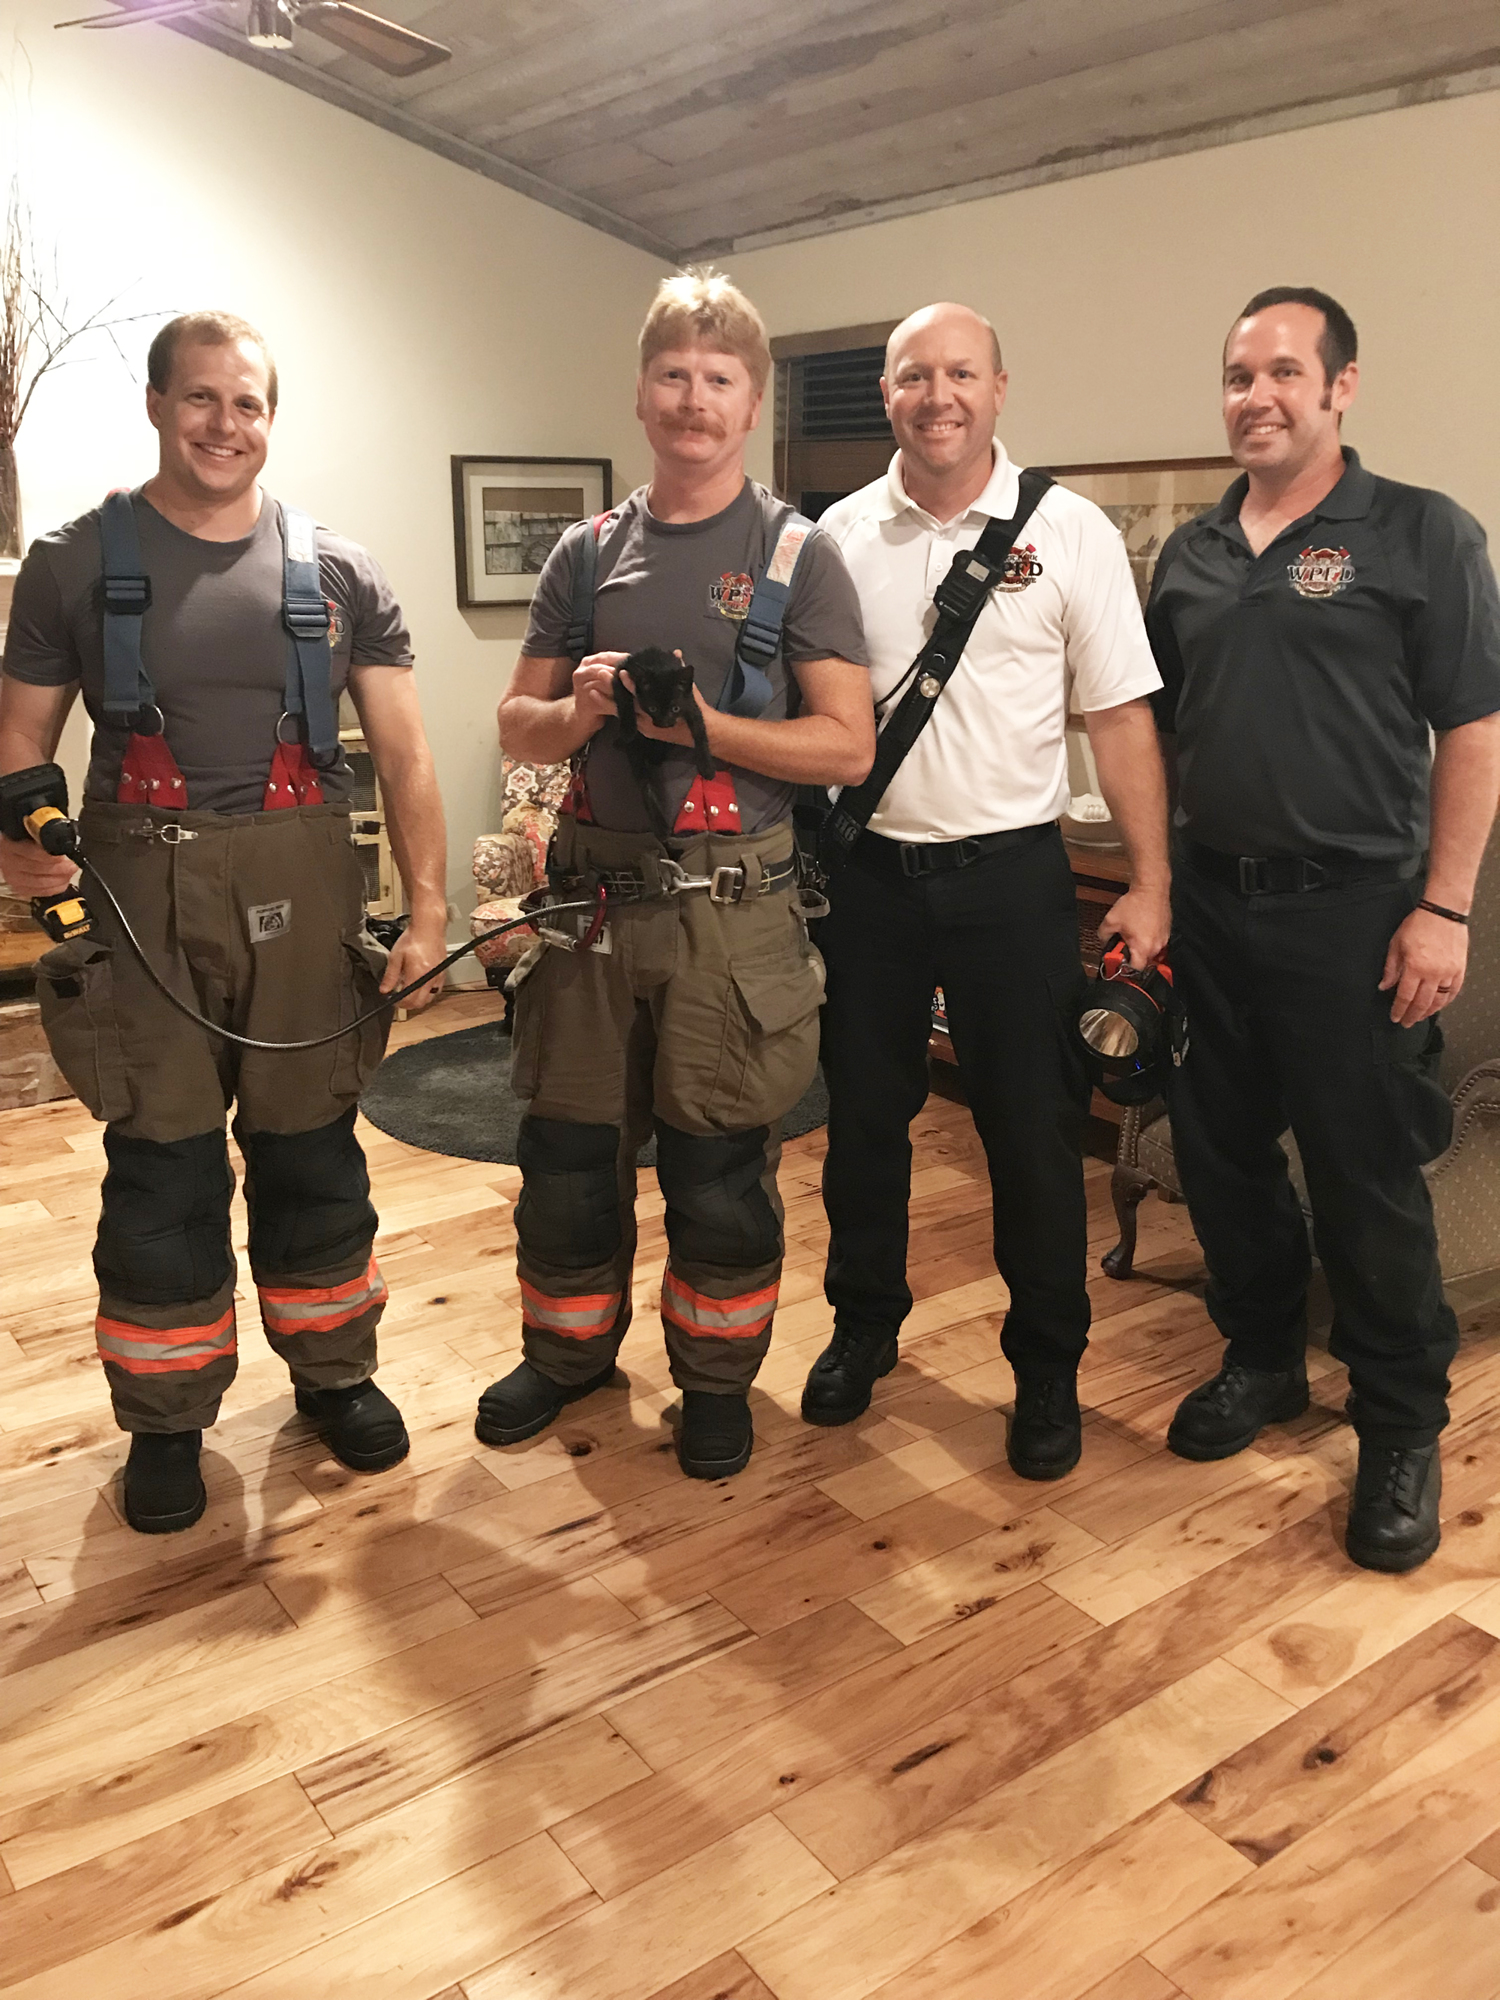 Joe Celletti, Kevin Dixon, Brad Grainger and Kevin Powers of the Winter Park Fire-Rescue Department rescued little Tiller after he got trapped in a vanity on Aug. 9.